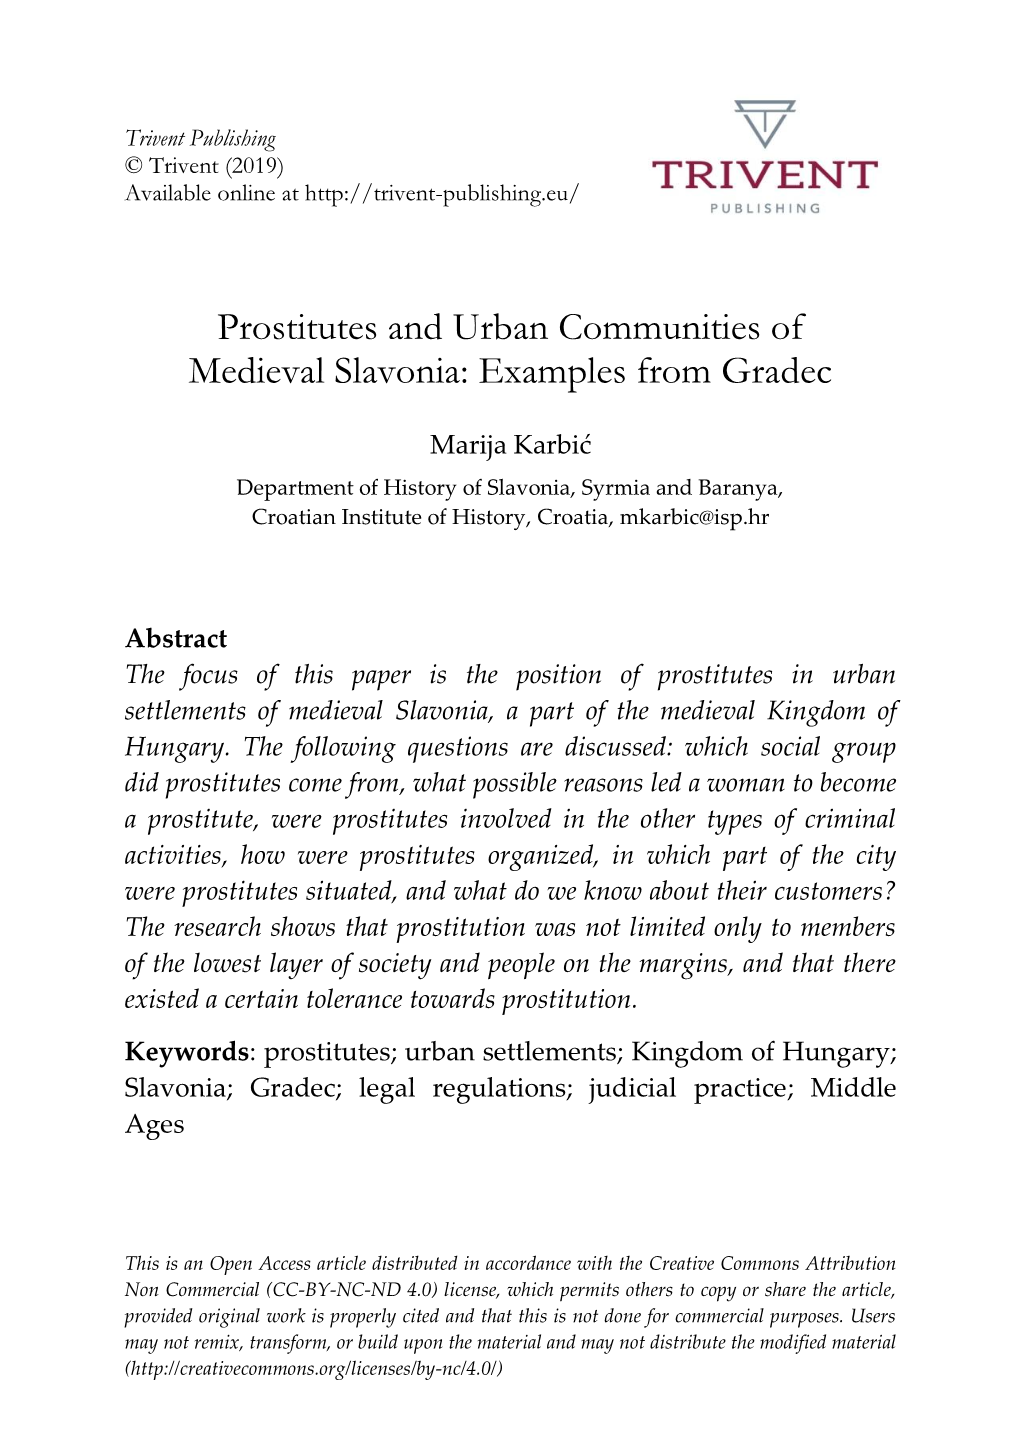 Prostitutes and Urban Communities of Medieval Slavonia: Examples from Gradec